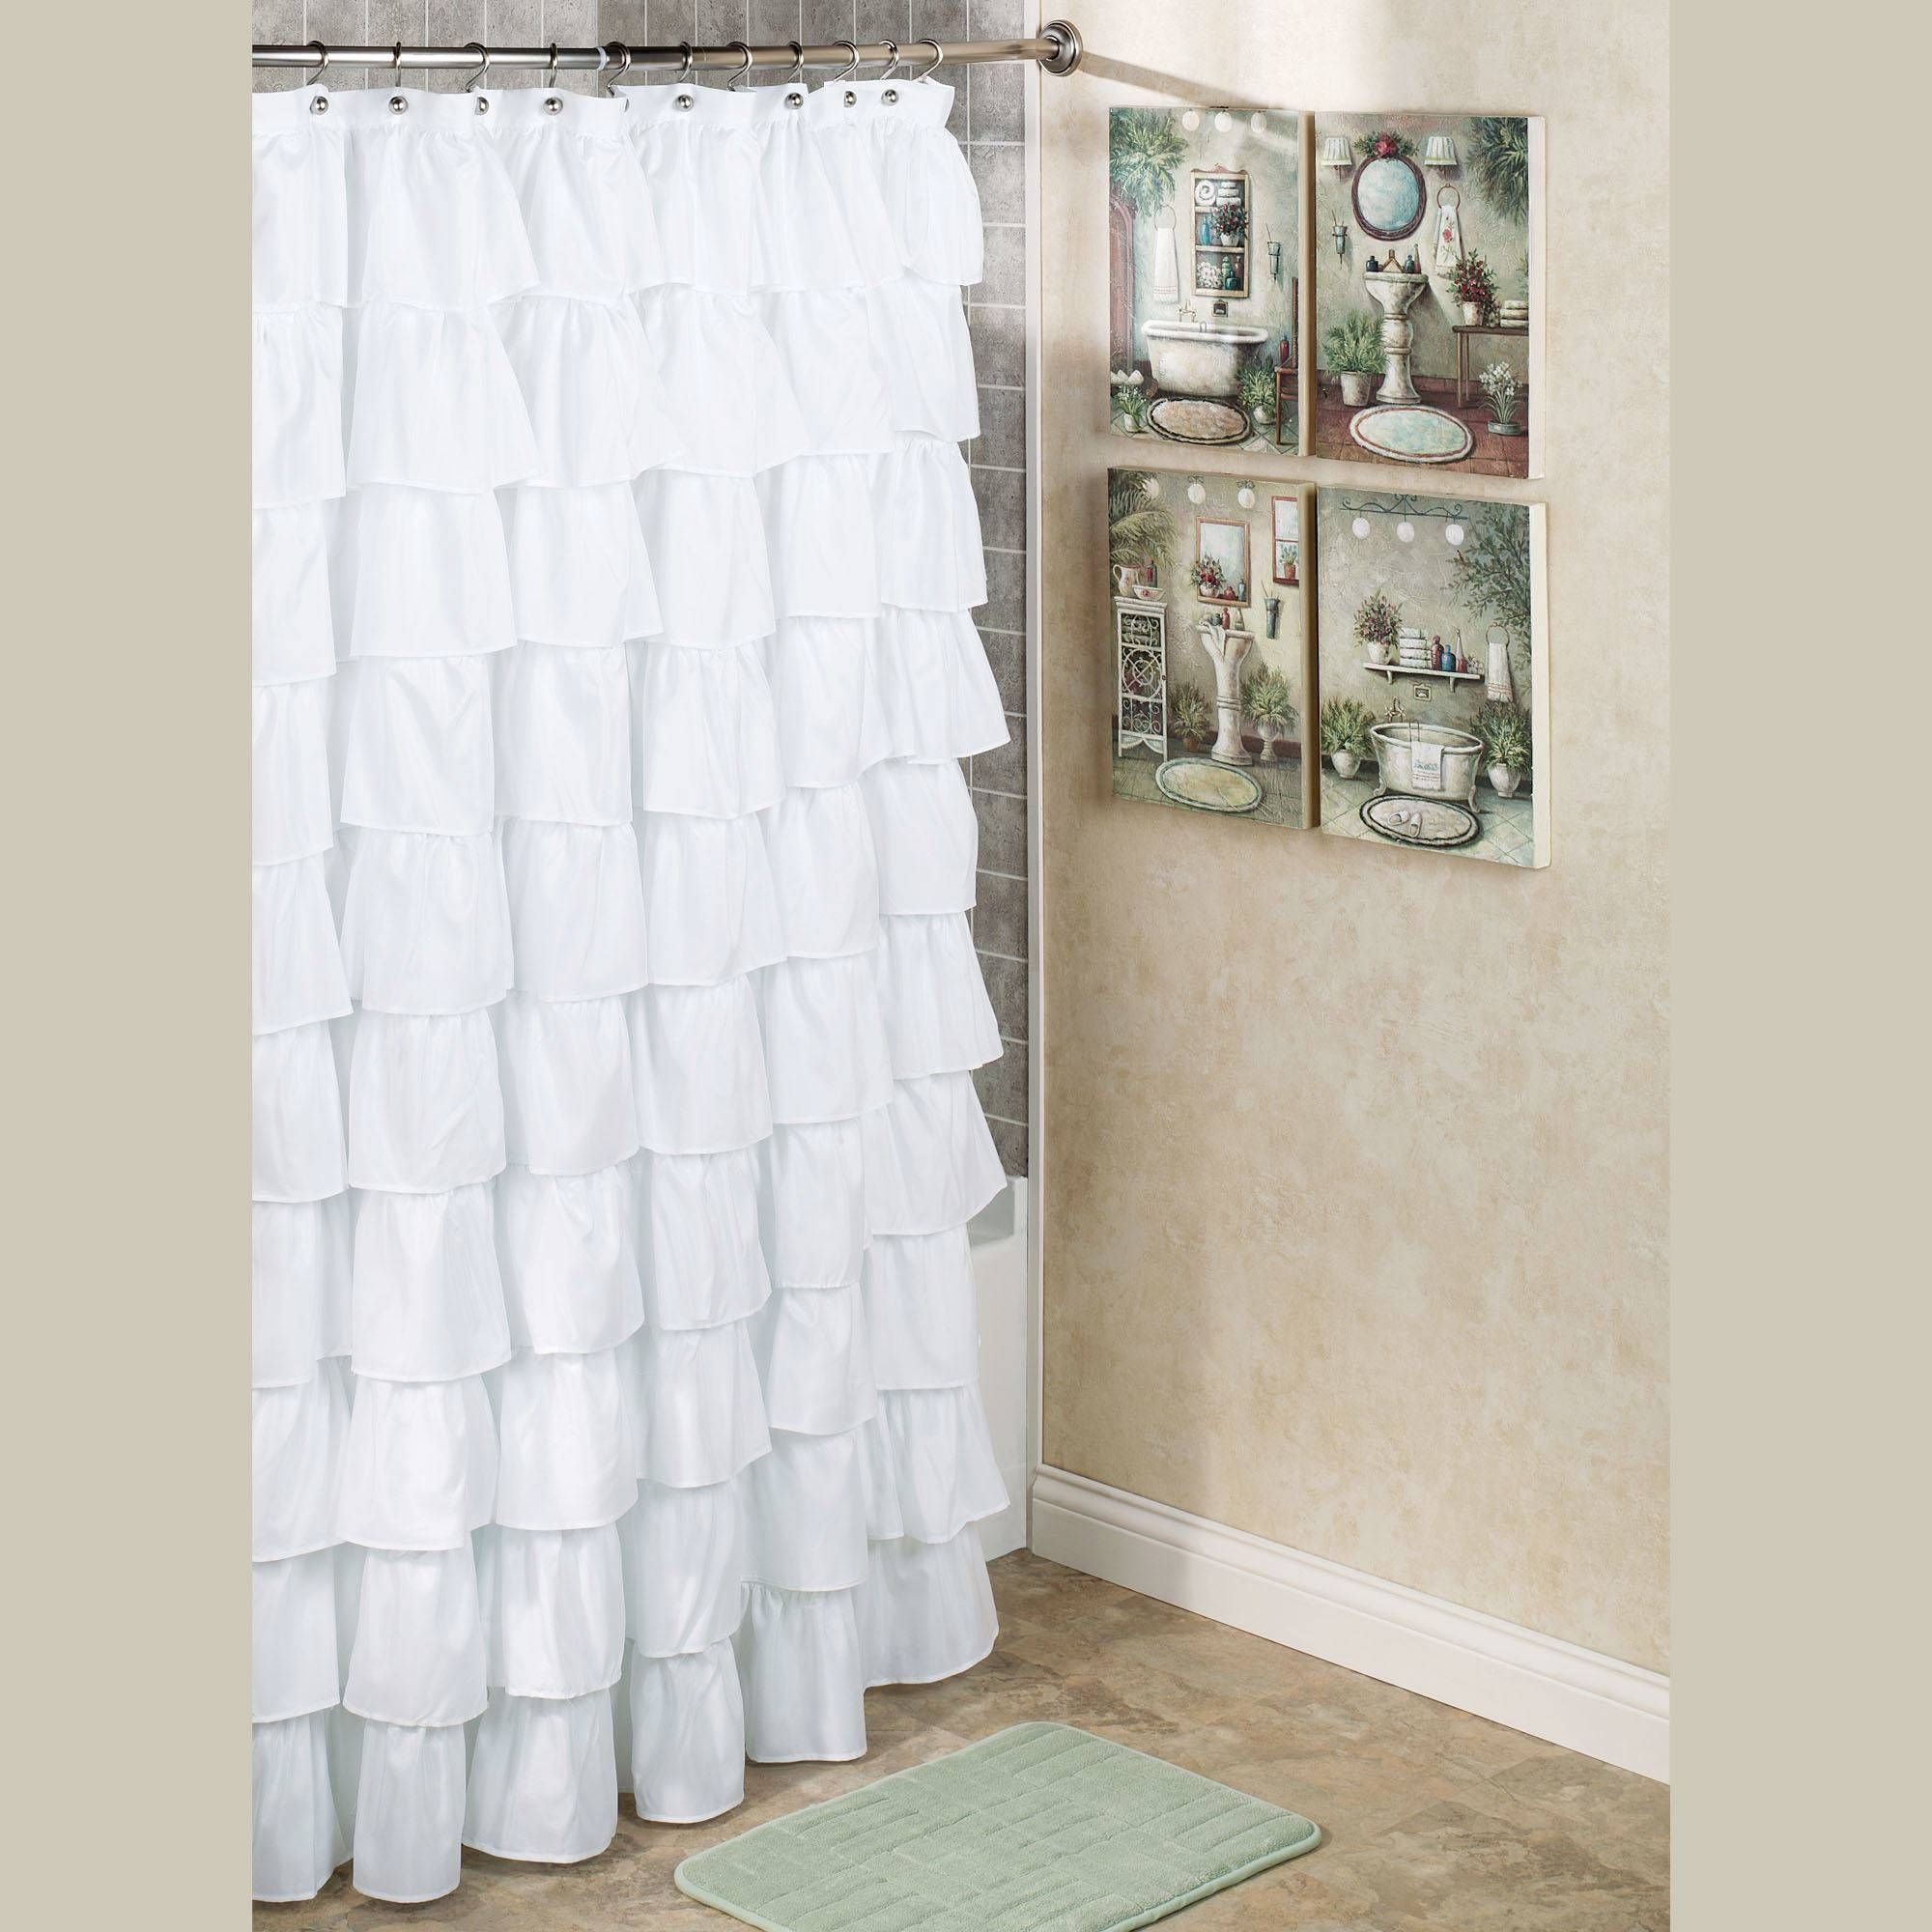 Fascinating Grey Ruffle Shower Curtain Farmhouse Linen With Regard To Navy Vertical Ruffled Waterfall Valance And Curtain Tiers (View 17 of 20)